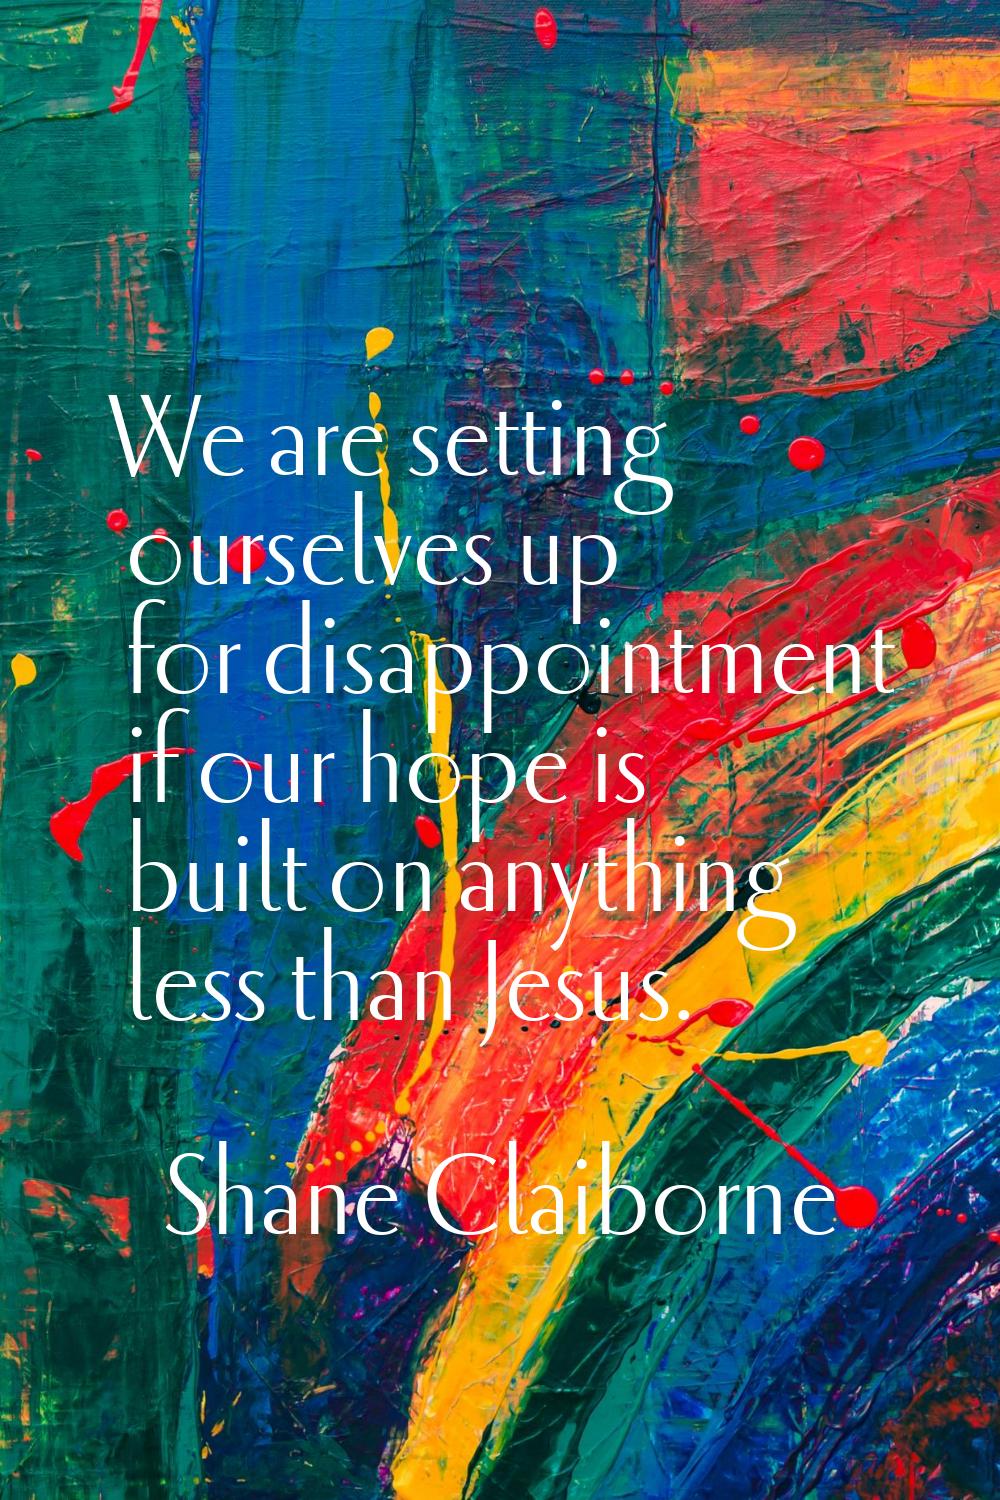 We are setting ourselves up for disappointment if our hope is built on anything less than Jesus.